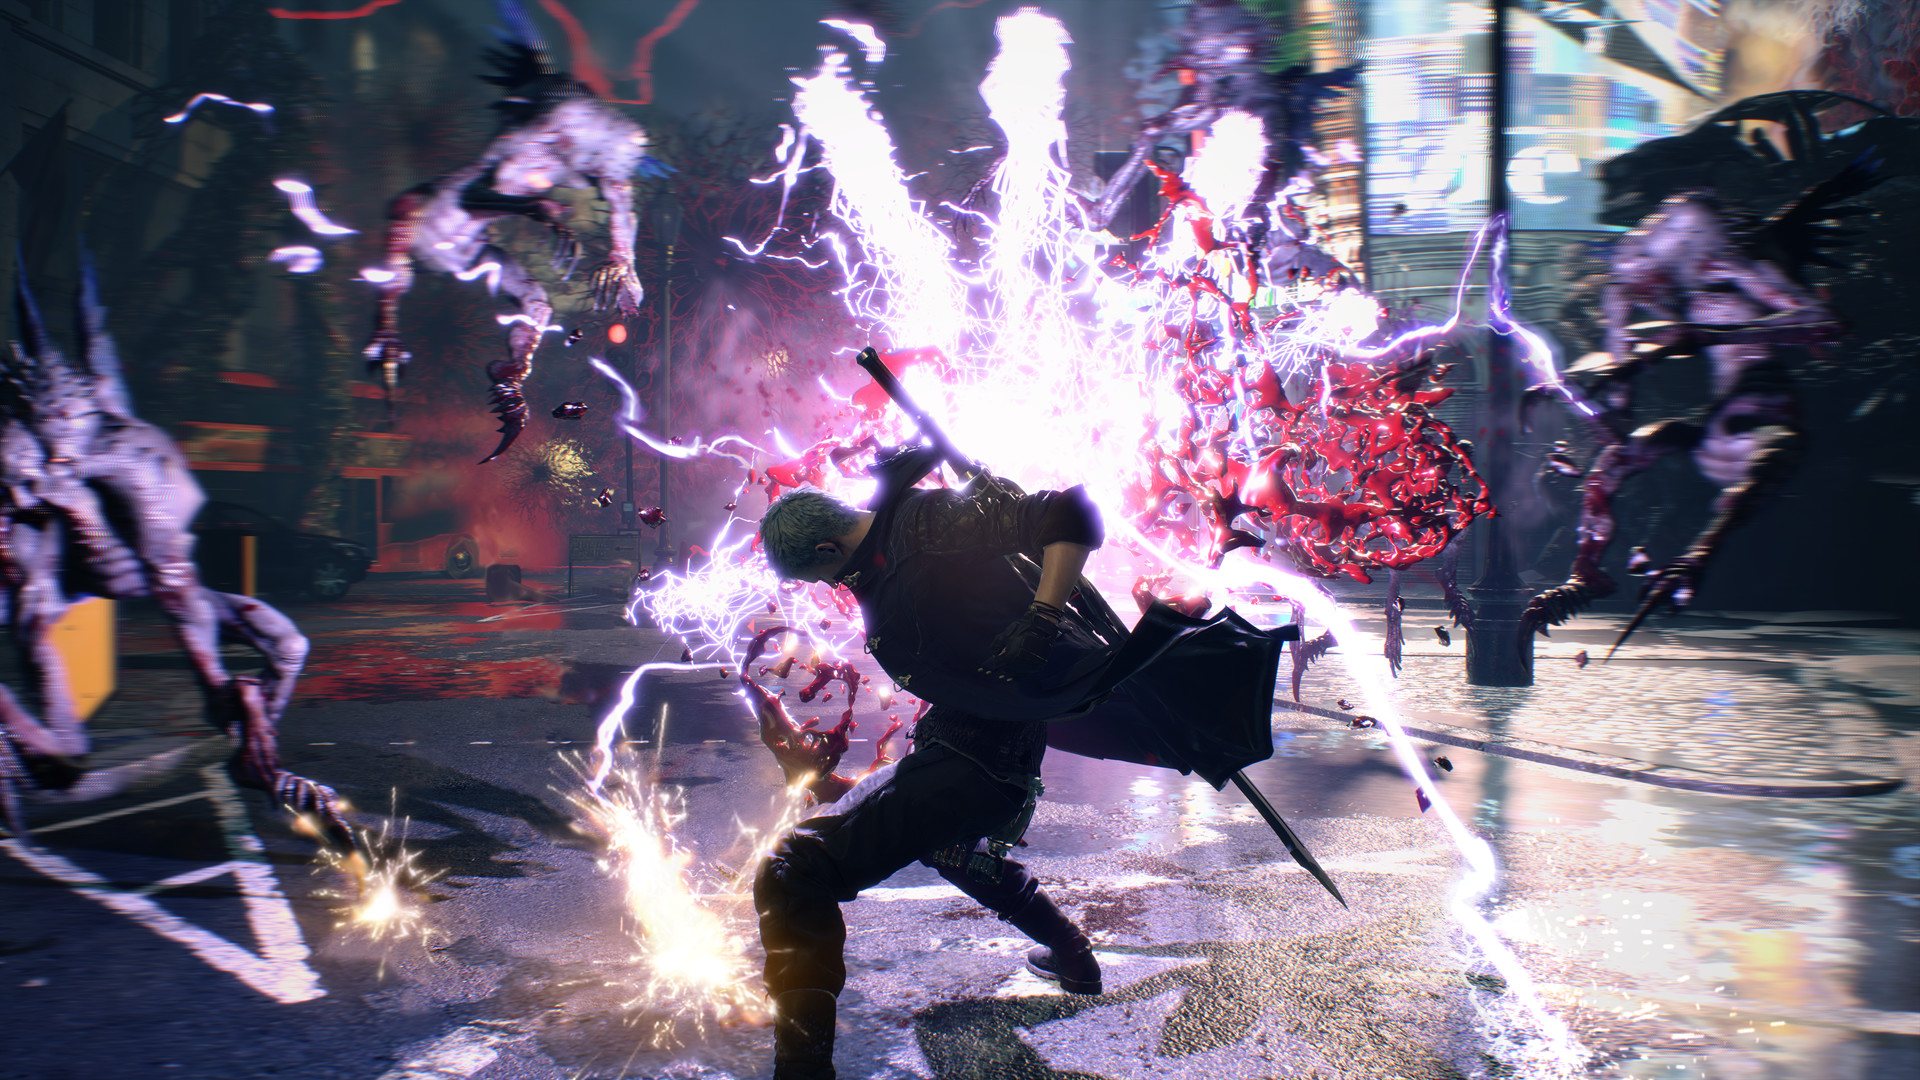 [$ 13.55] Devil May Cry 5 PlayStation 4 Account pixelpuffin.net Activation Link